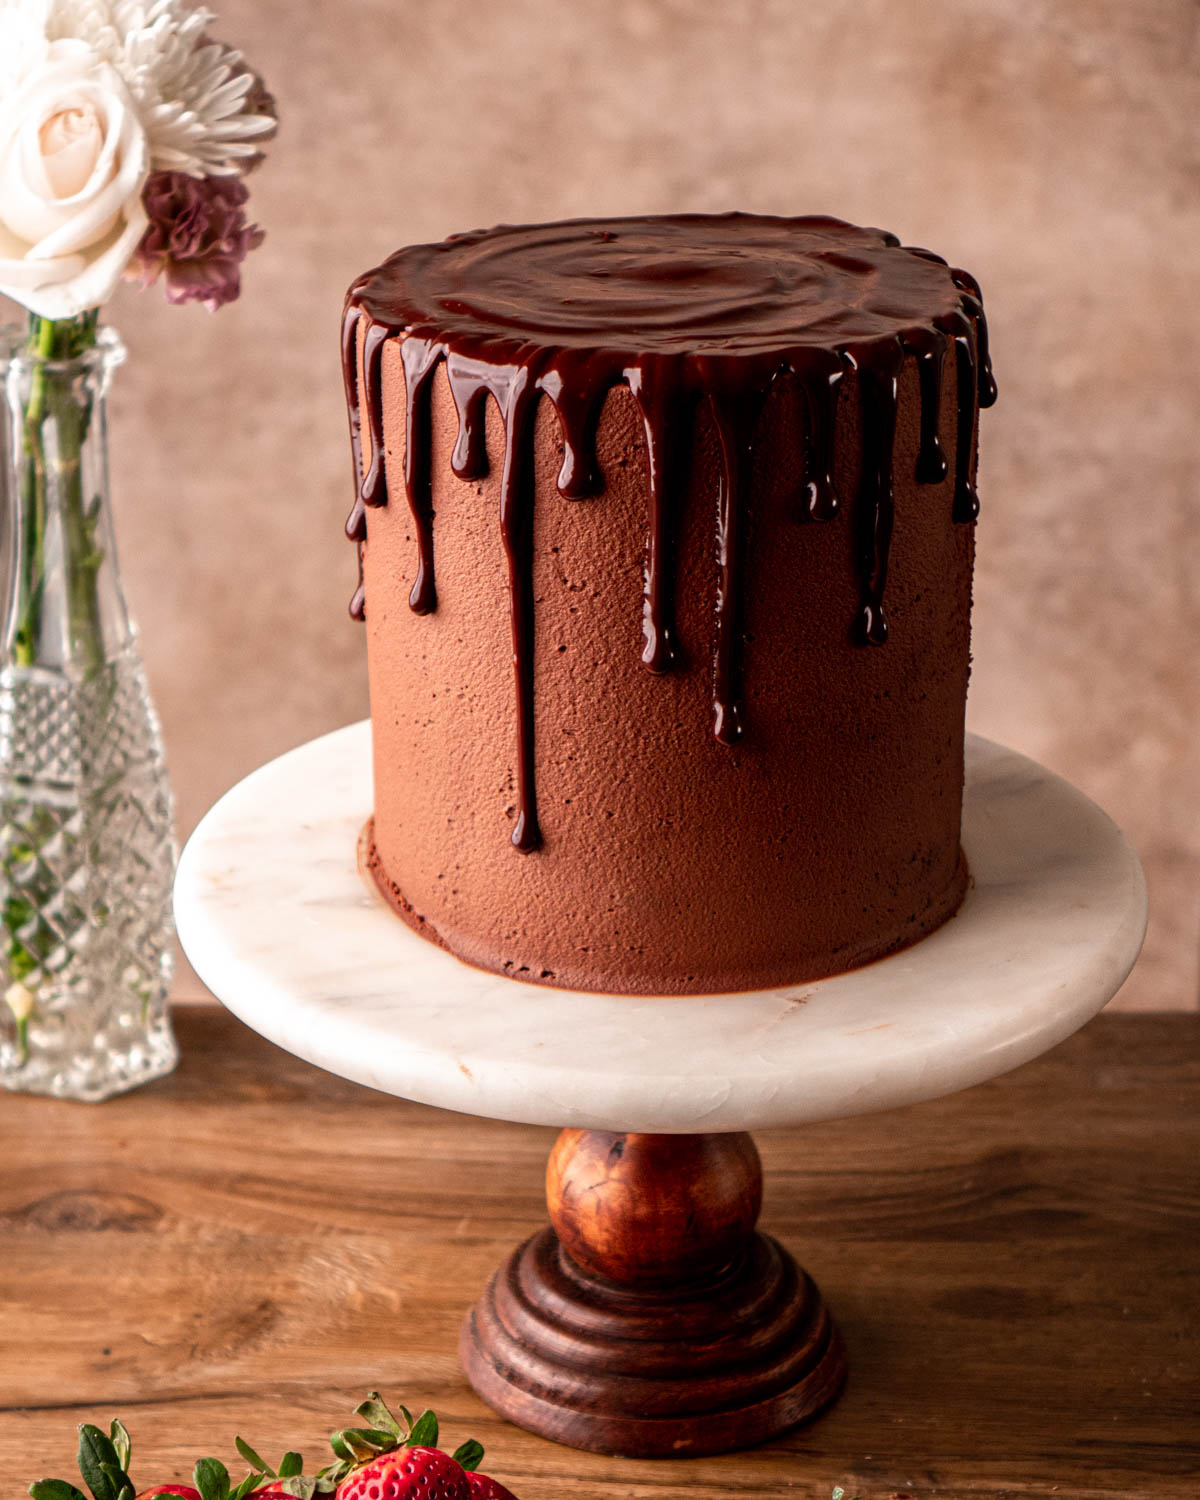 cake with ganache drip on, on a cake stand 